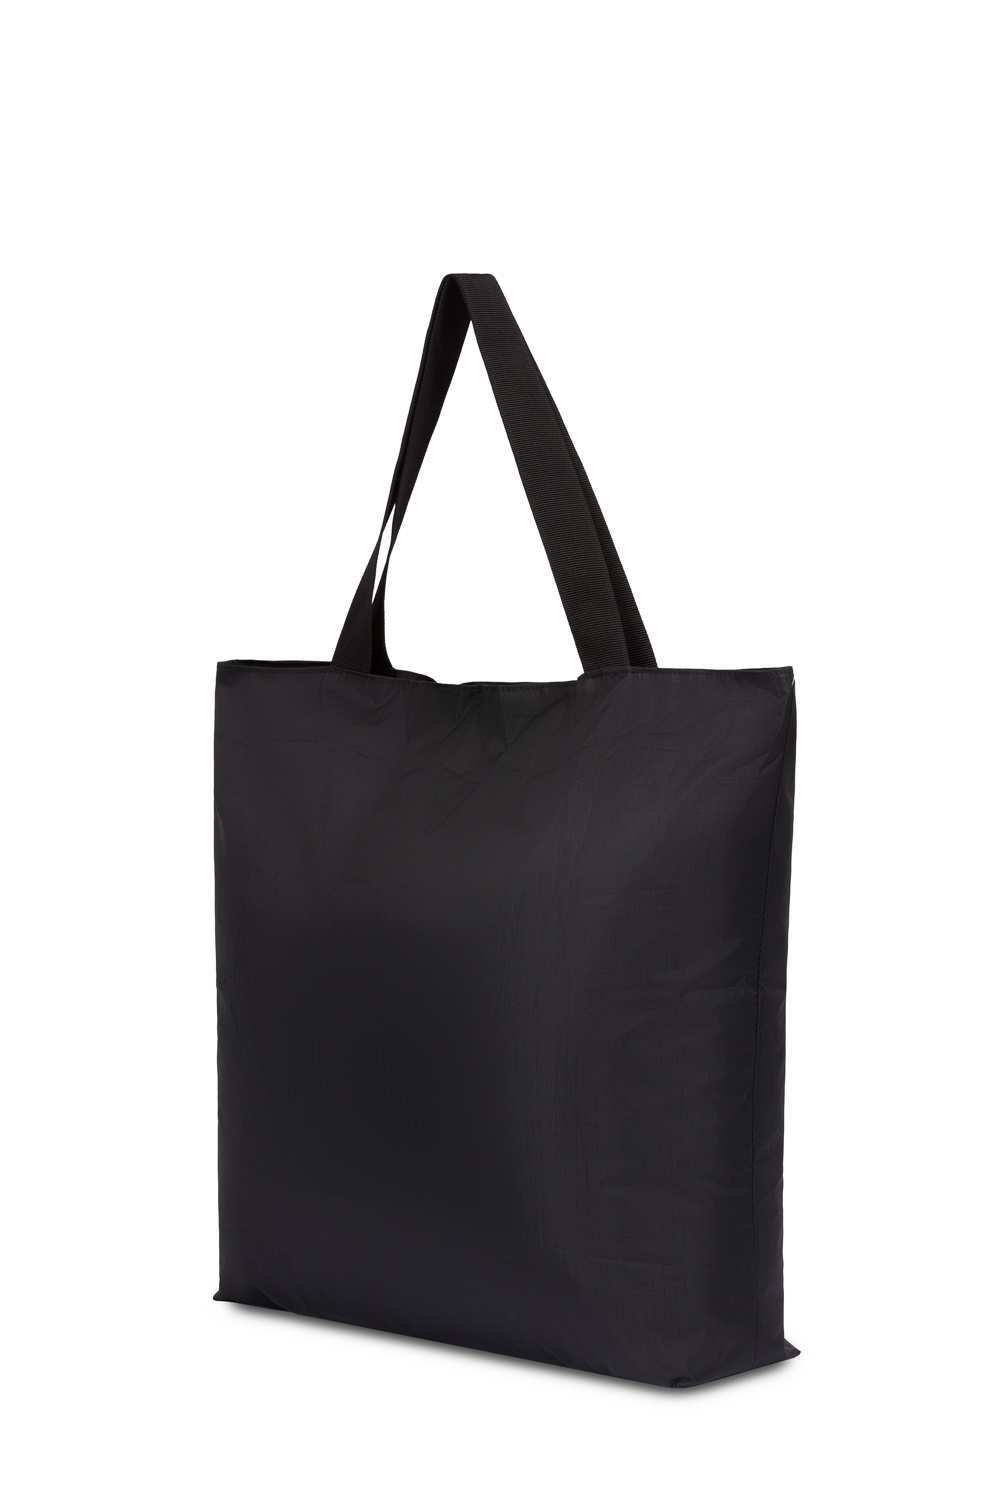 Photo Tote Bag with Zipper. Personalized Zippered Tote Bags